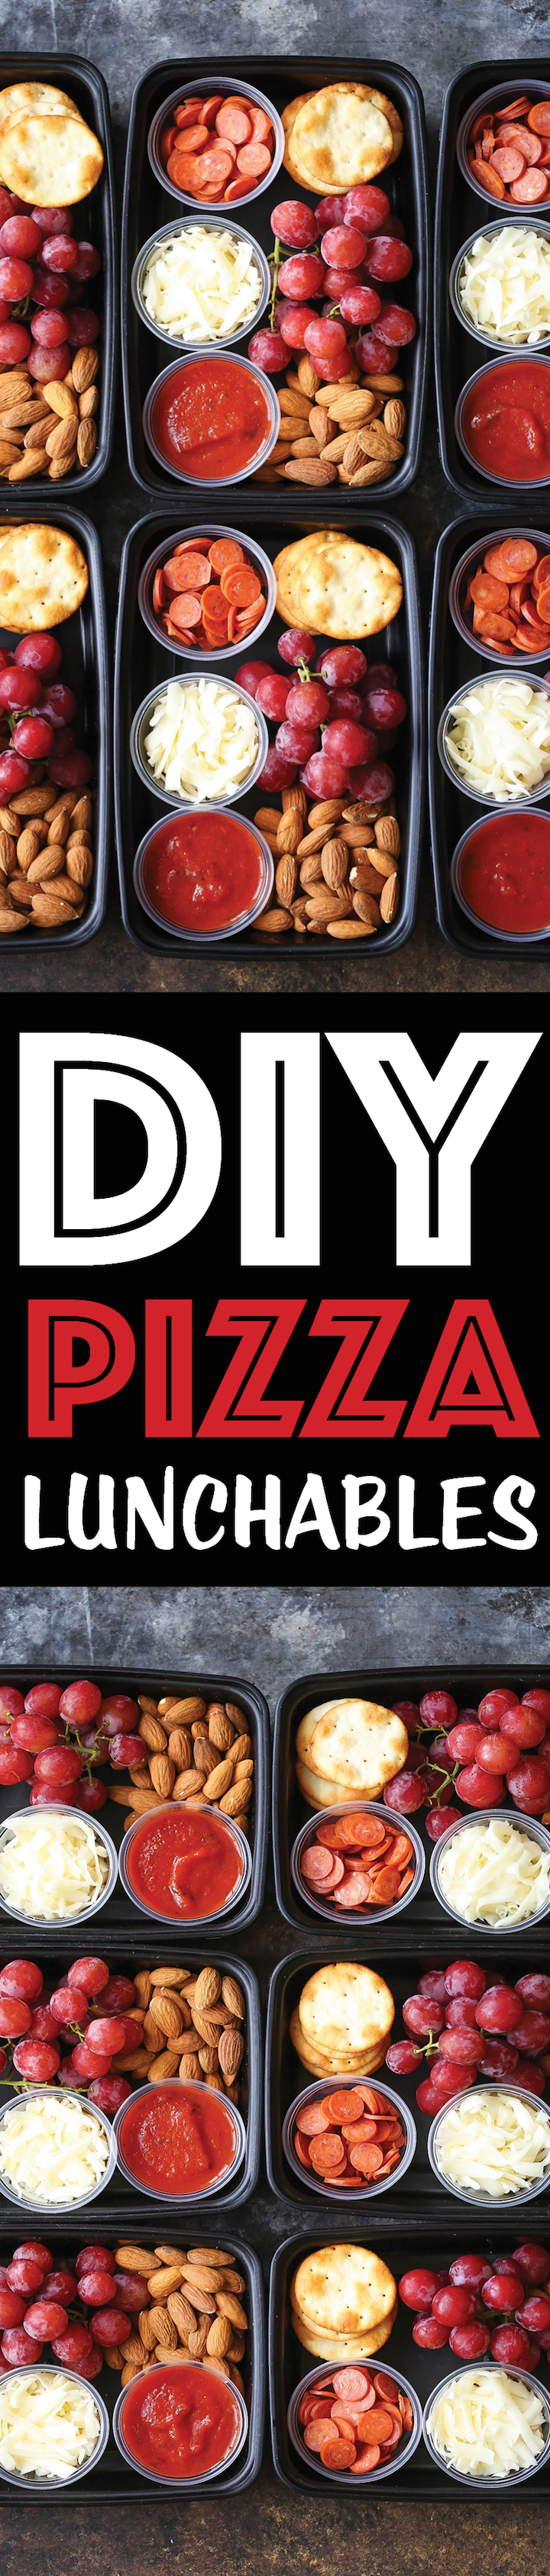 DIY Pizza Lunchables - This is so much better, tastier and healthier than the store-bought kind! Prep/make ahead of time for the week in just 10-15 min!